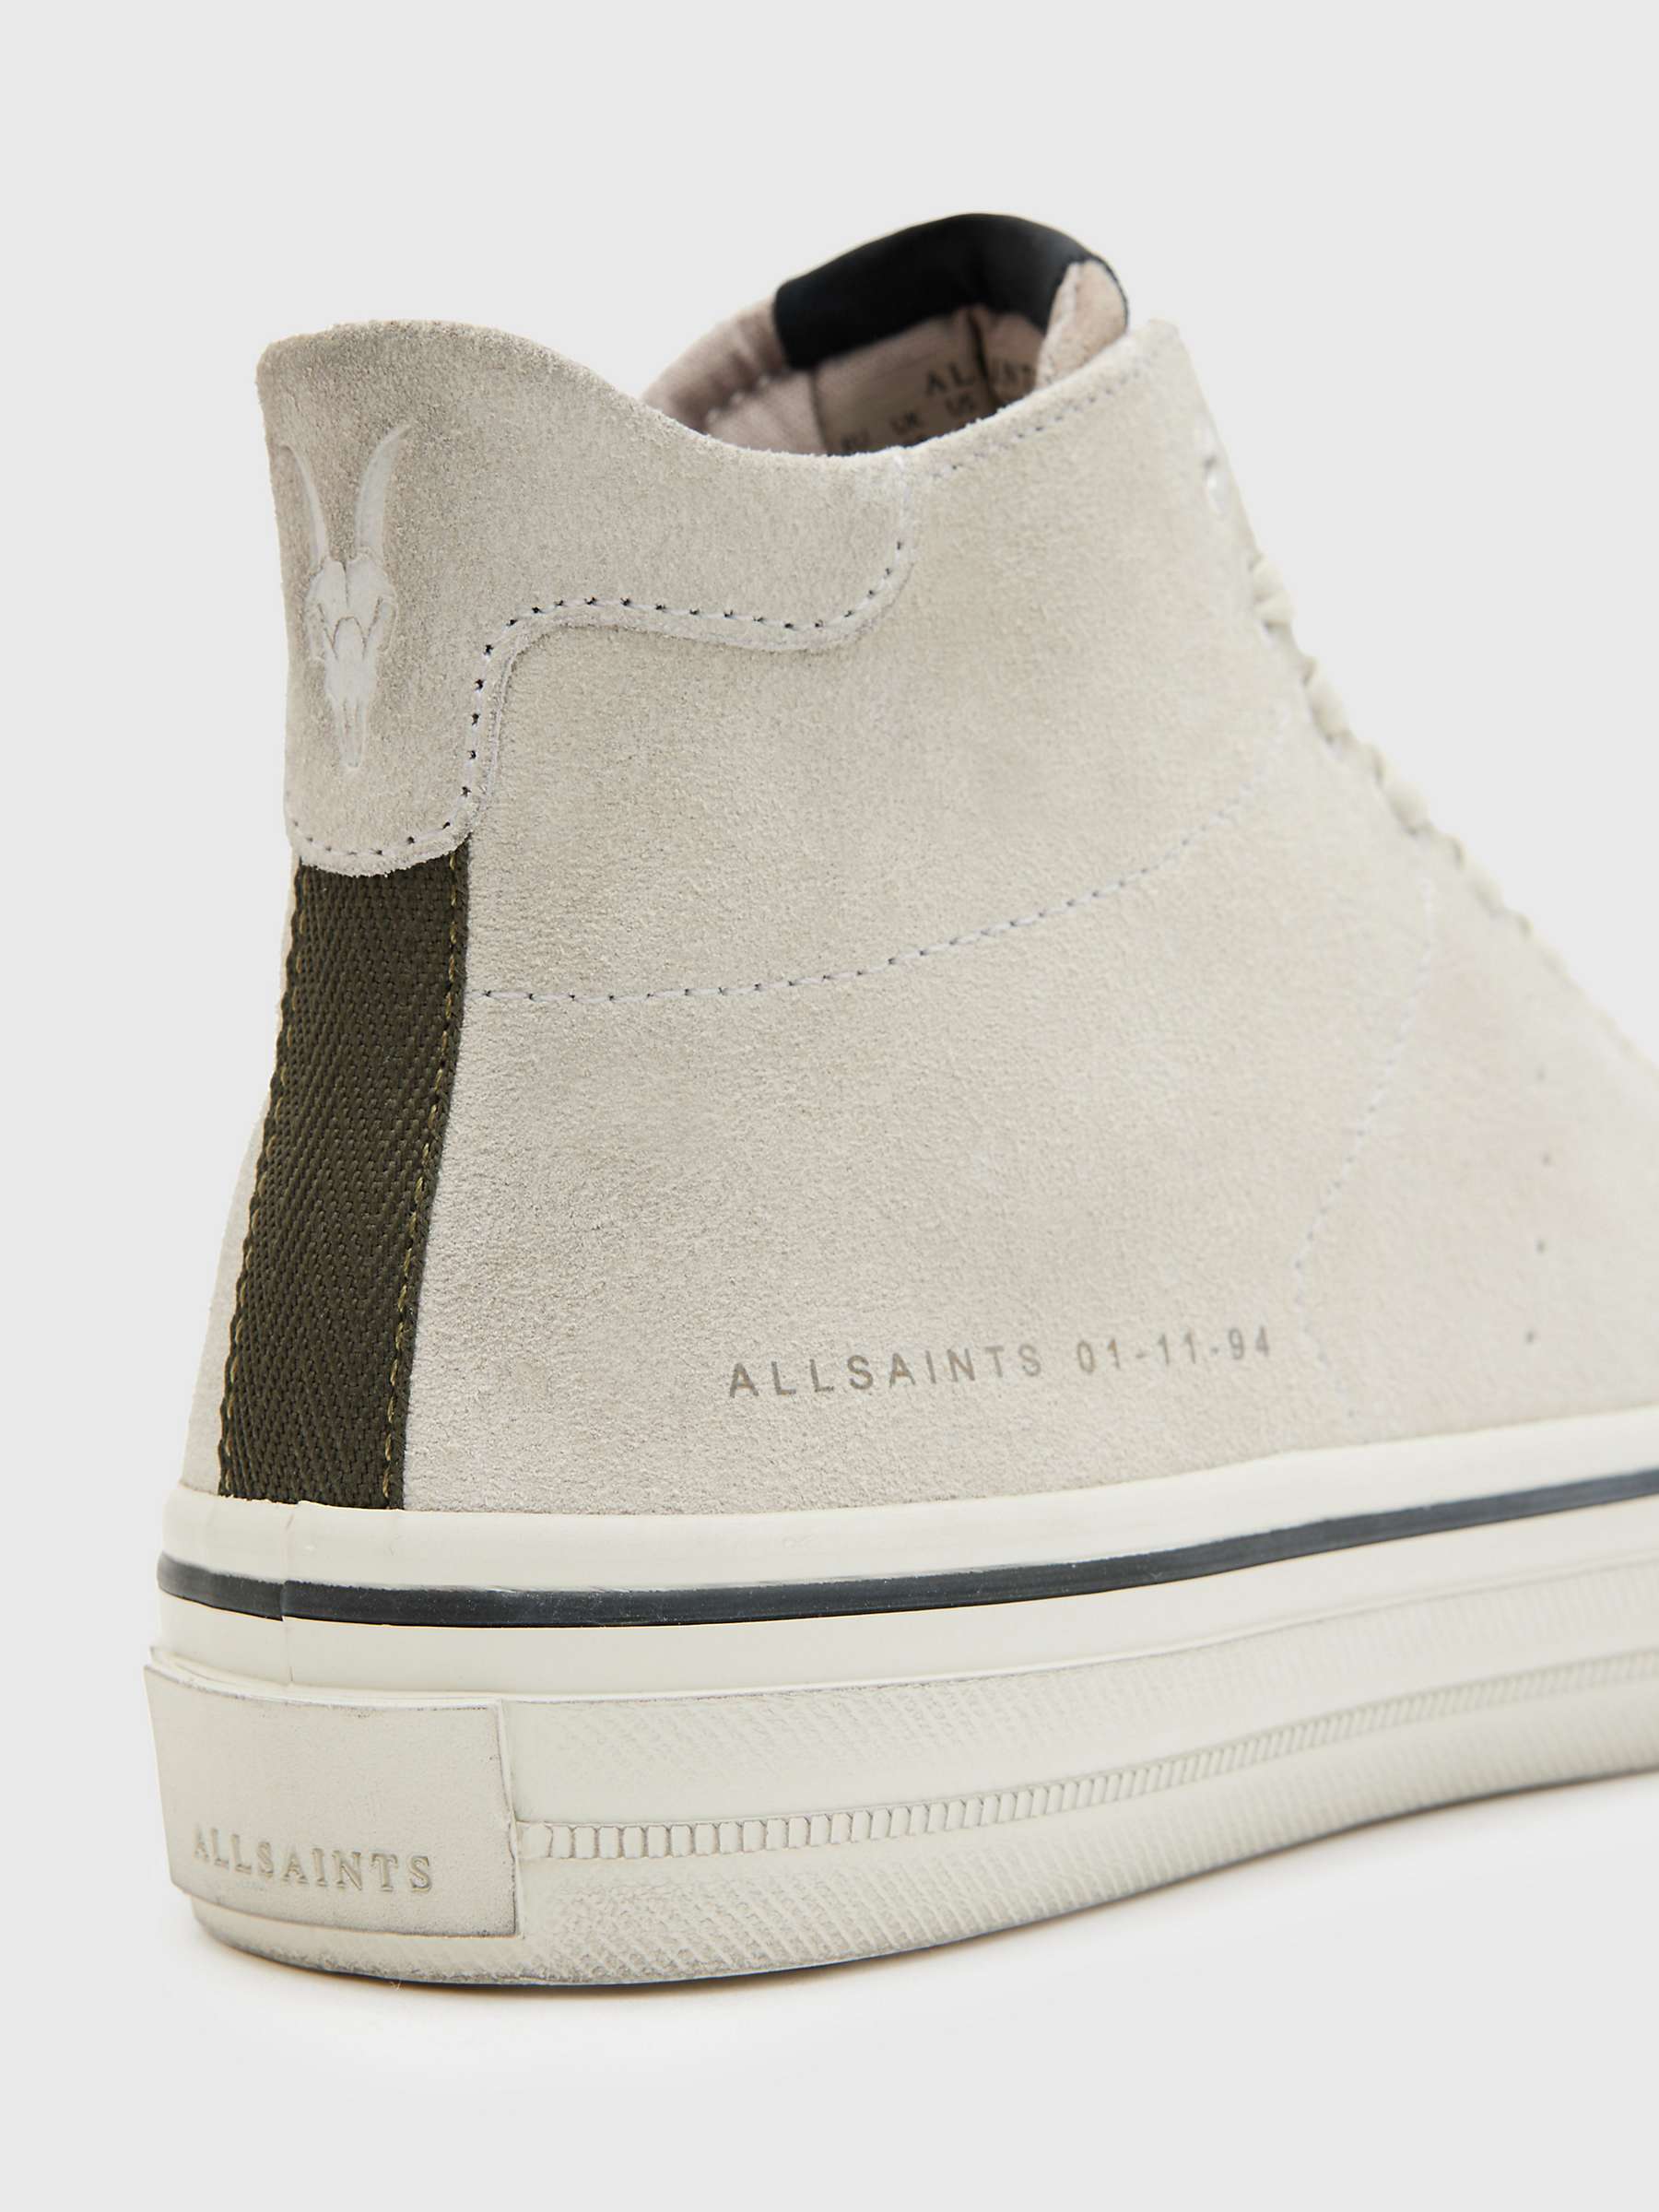 Buy AllSaints Lewis Leather High Top Trainers, Chalk White Online at johnlewis.com